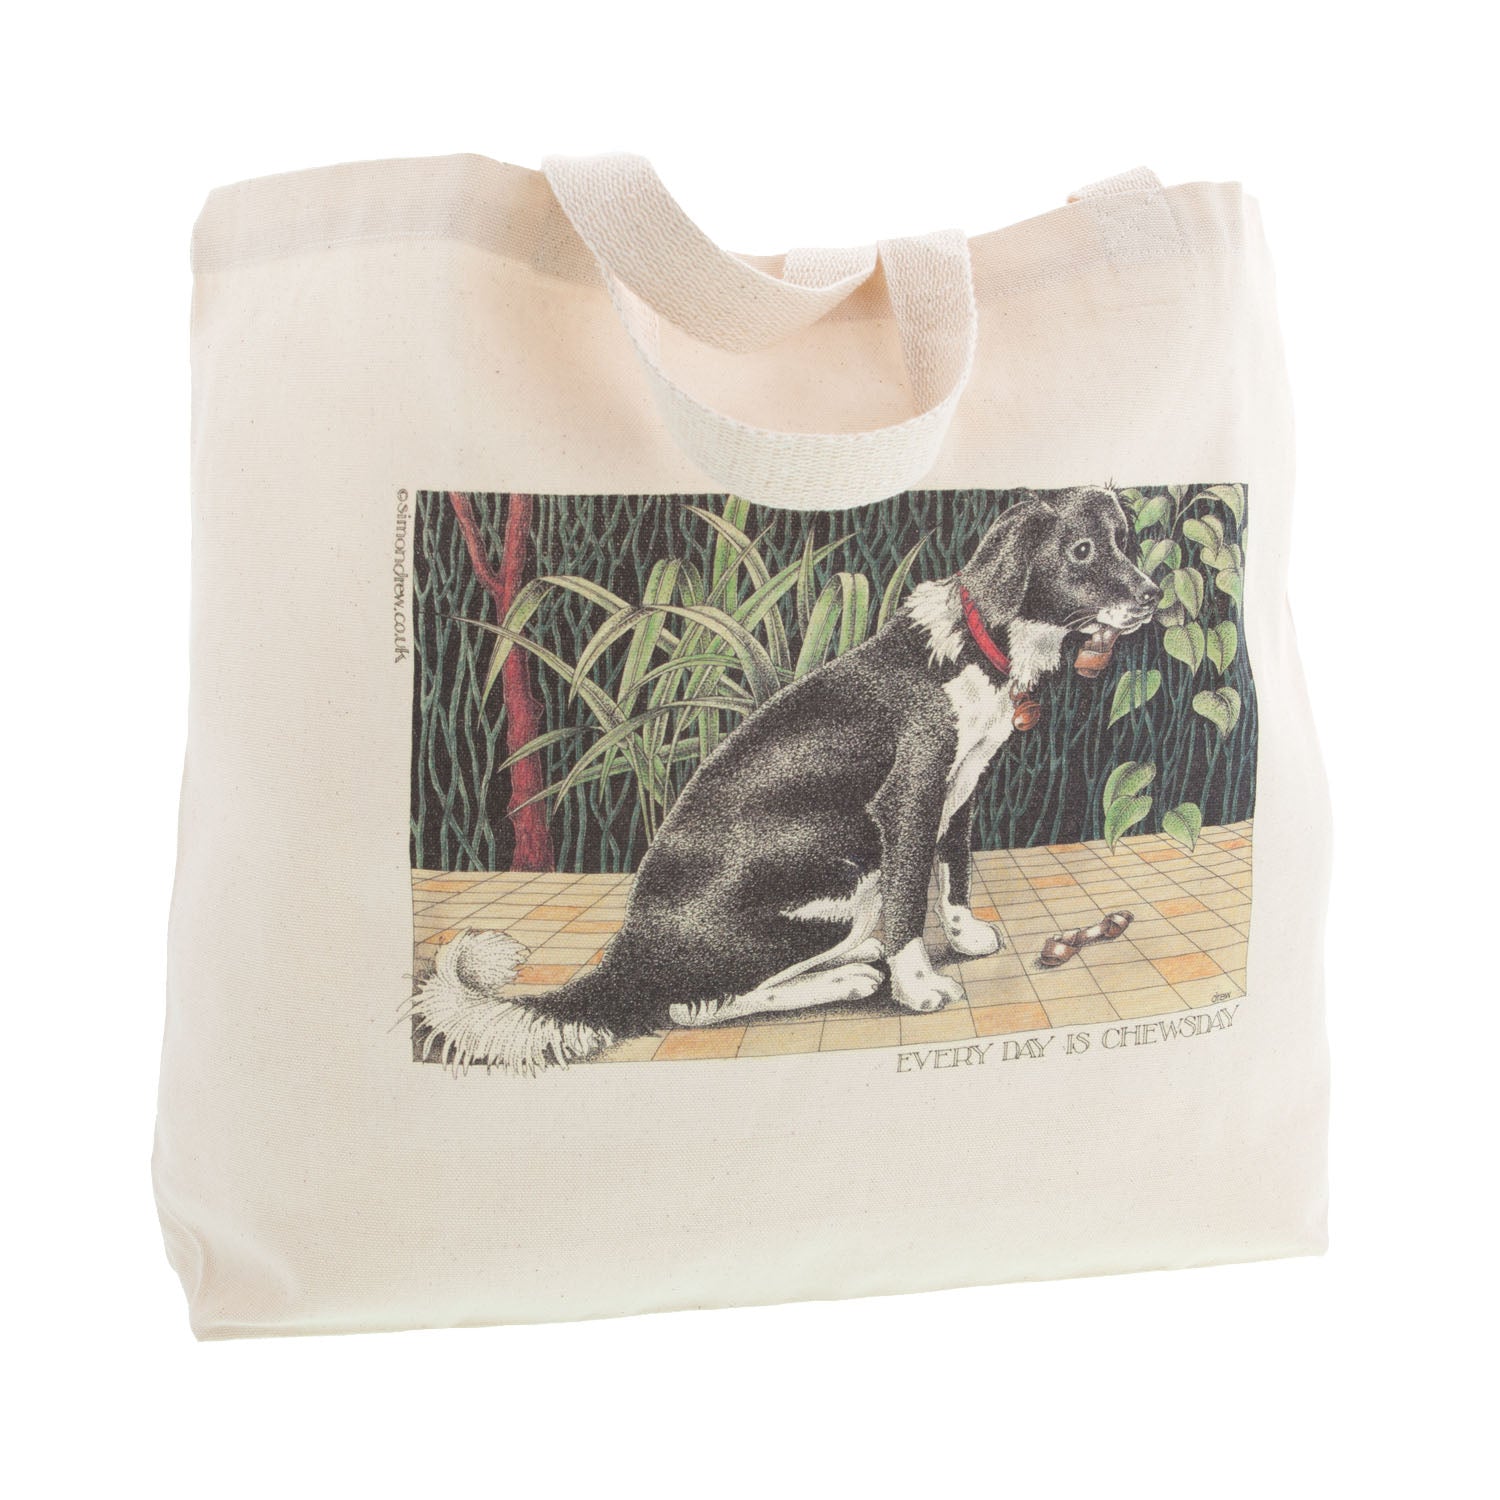 Dog Lover Cards, Gifts and merchandise available at Dog Krazy Gifts - Everyday Is Chewsday Bag - Part of the Simon Drew dog collection available from Dog Krazy Gifts